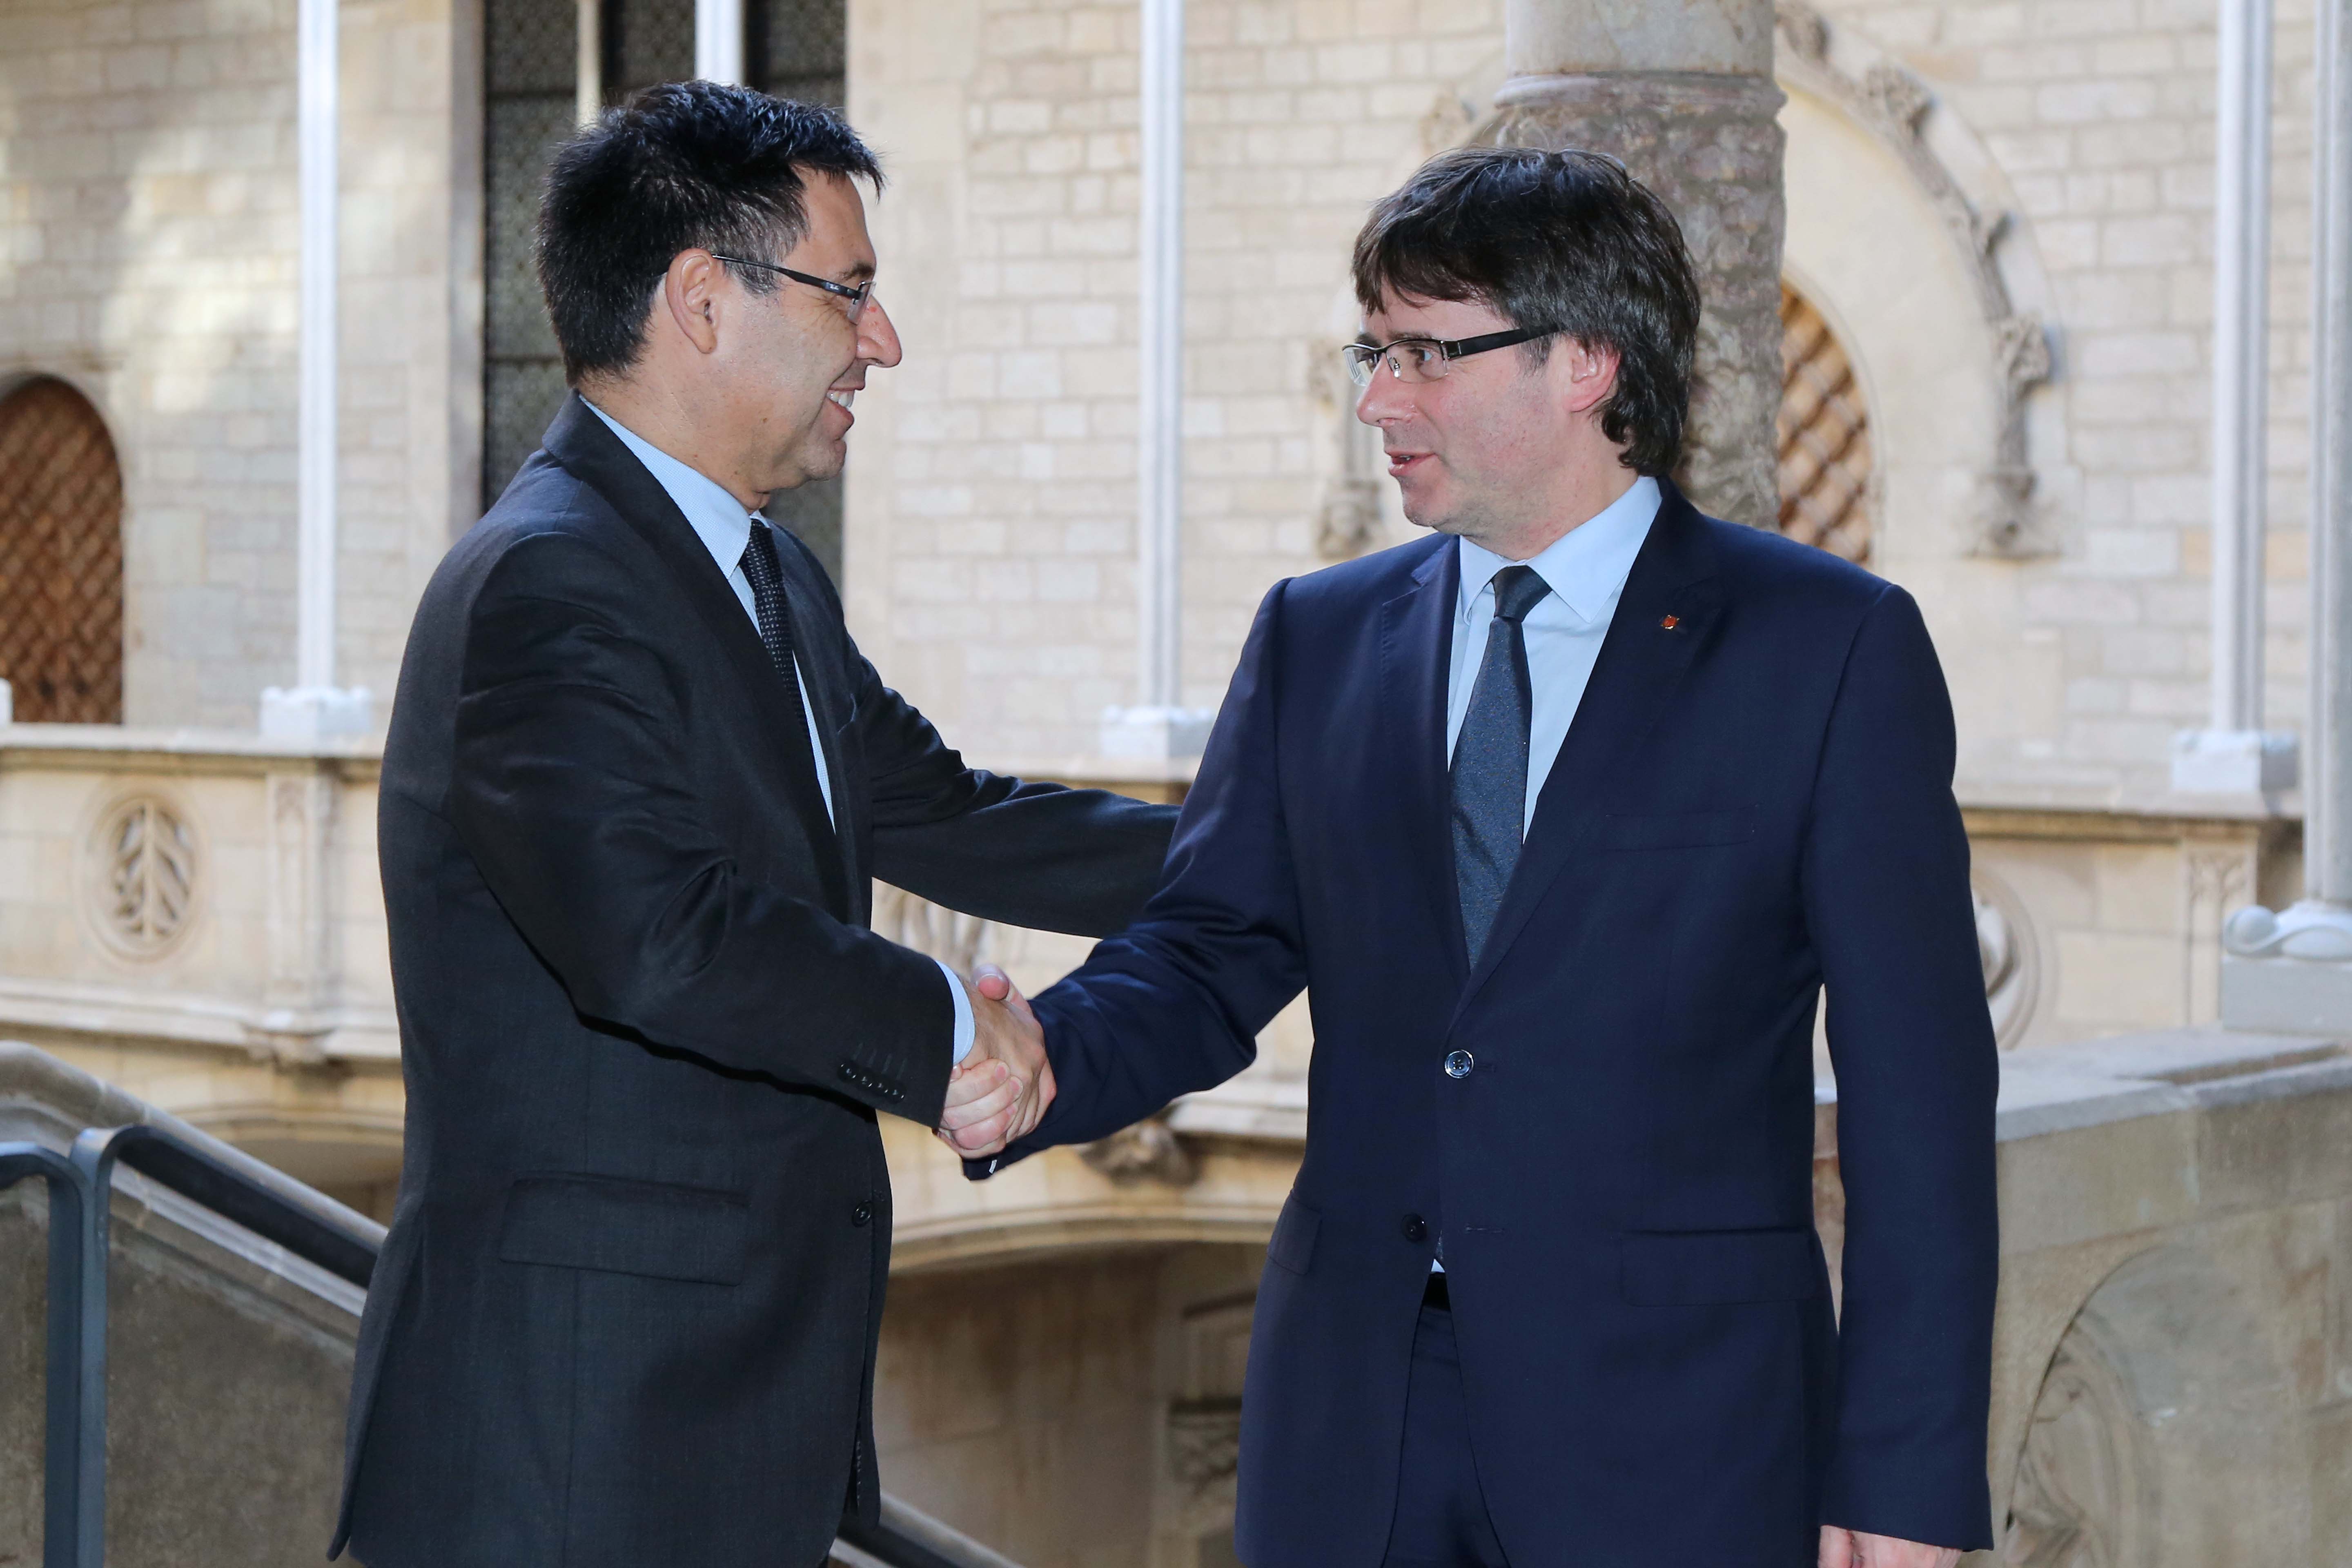 The FC Barcelona president, Josep Maria Bartomeu, and the Catalan president, Carles Puigdemont, met in March 2016